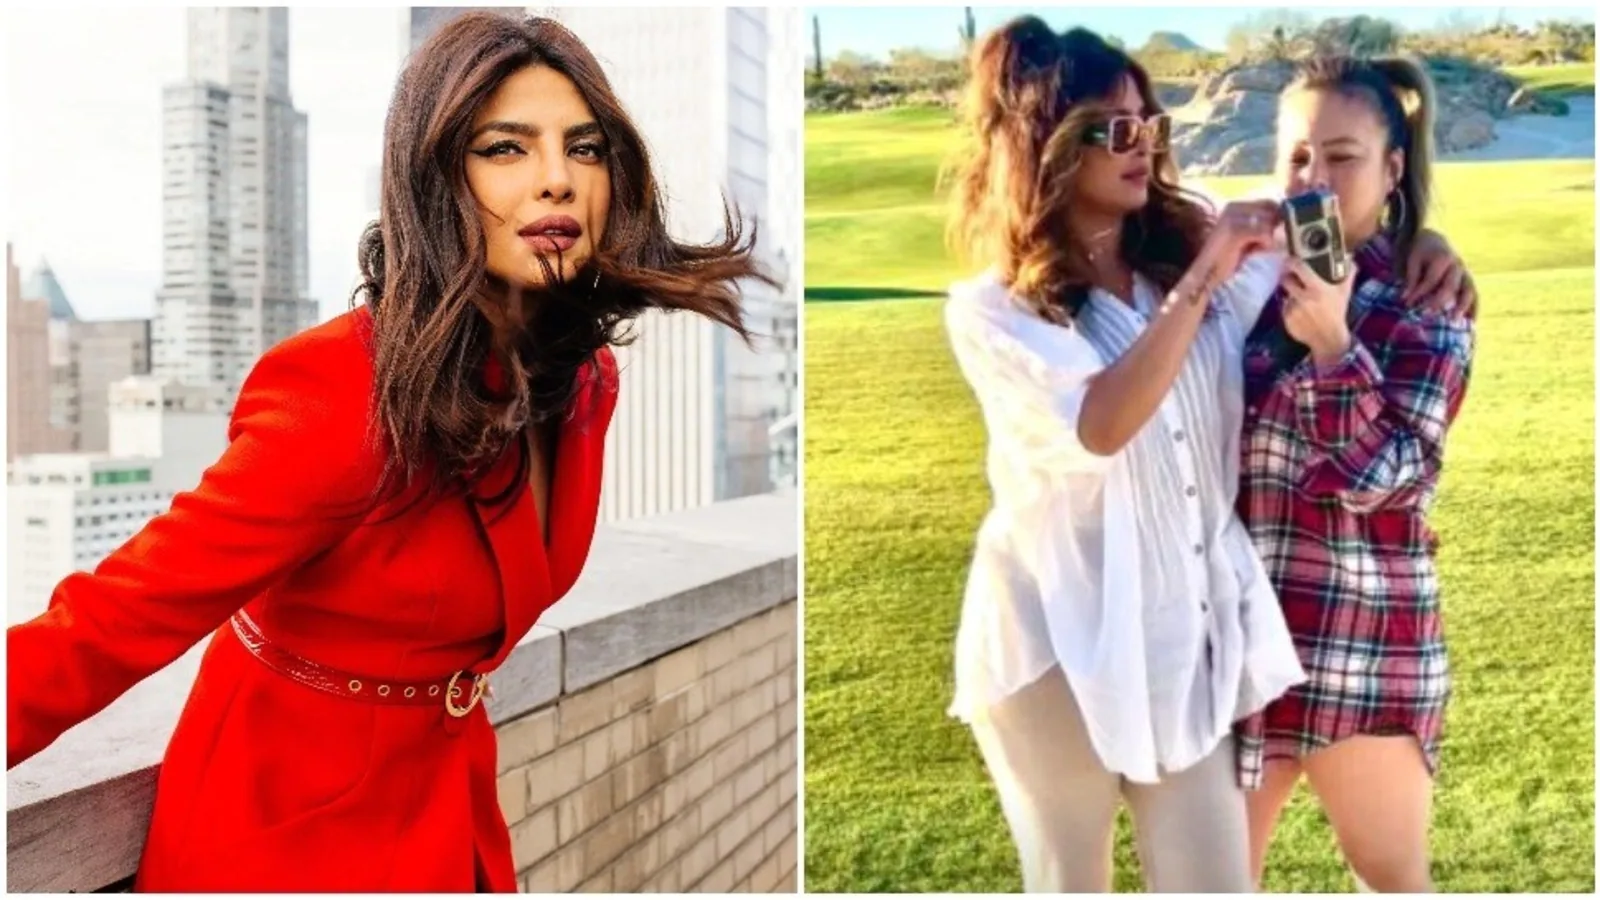 Priyanka Chopra shares new pic from Arizona as she poses with her friend: ‘Just doing what we do’. See post